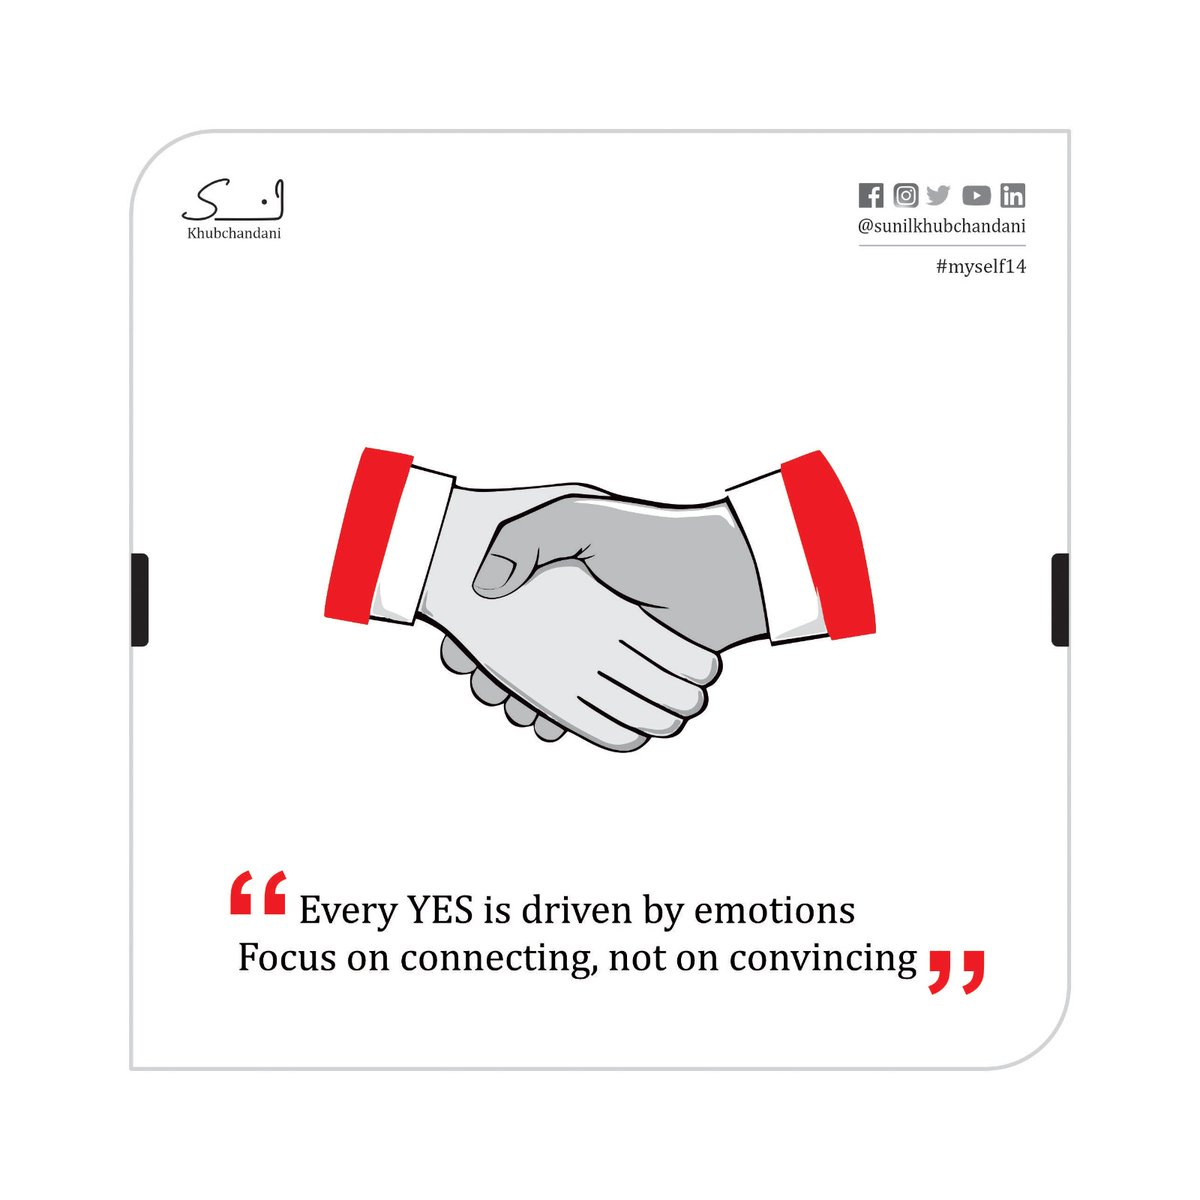 The human mind is emotionally driven, so every 'YES' is fueled by emotions.

Communication success comes from building emotional connections with people.

Cultivate this art in yourself.

#emotionalconnect
#sunilkhubchandani